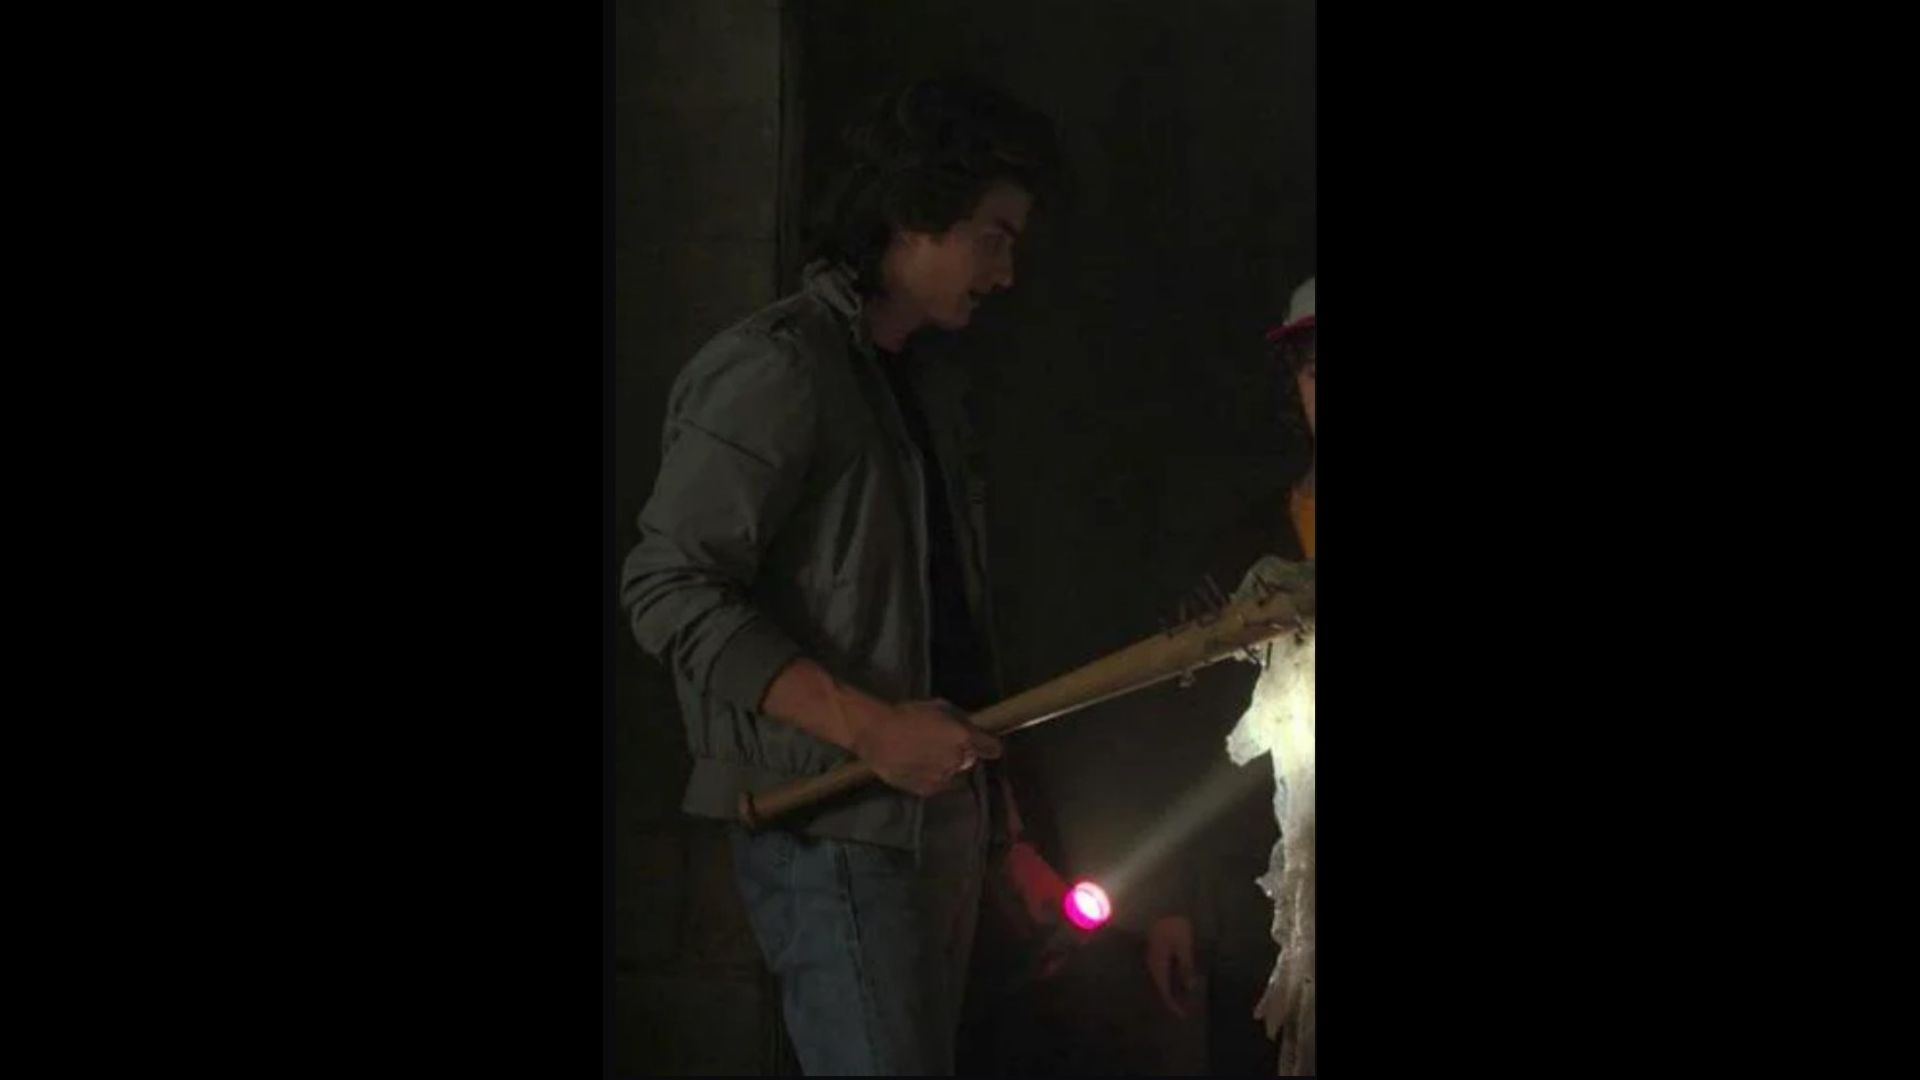 It would have been impossible for any of the Stranger Things kids to solve mysteries without their flashlights, which resemble models such as the Eveready Commander that was popular in the 1960s and 70s, but their gigantic metal lights are way out of date.